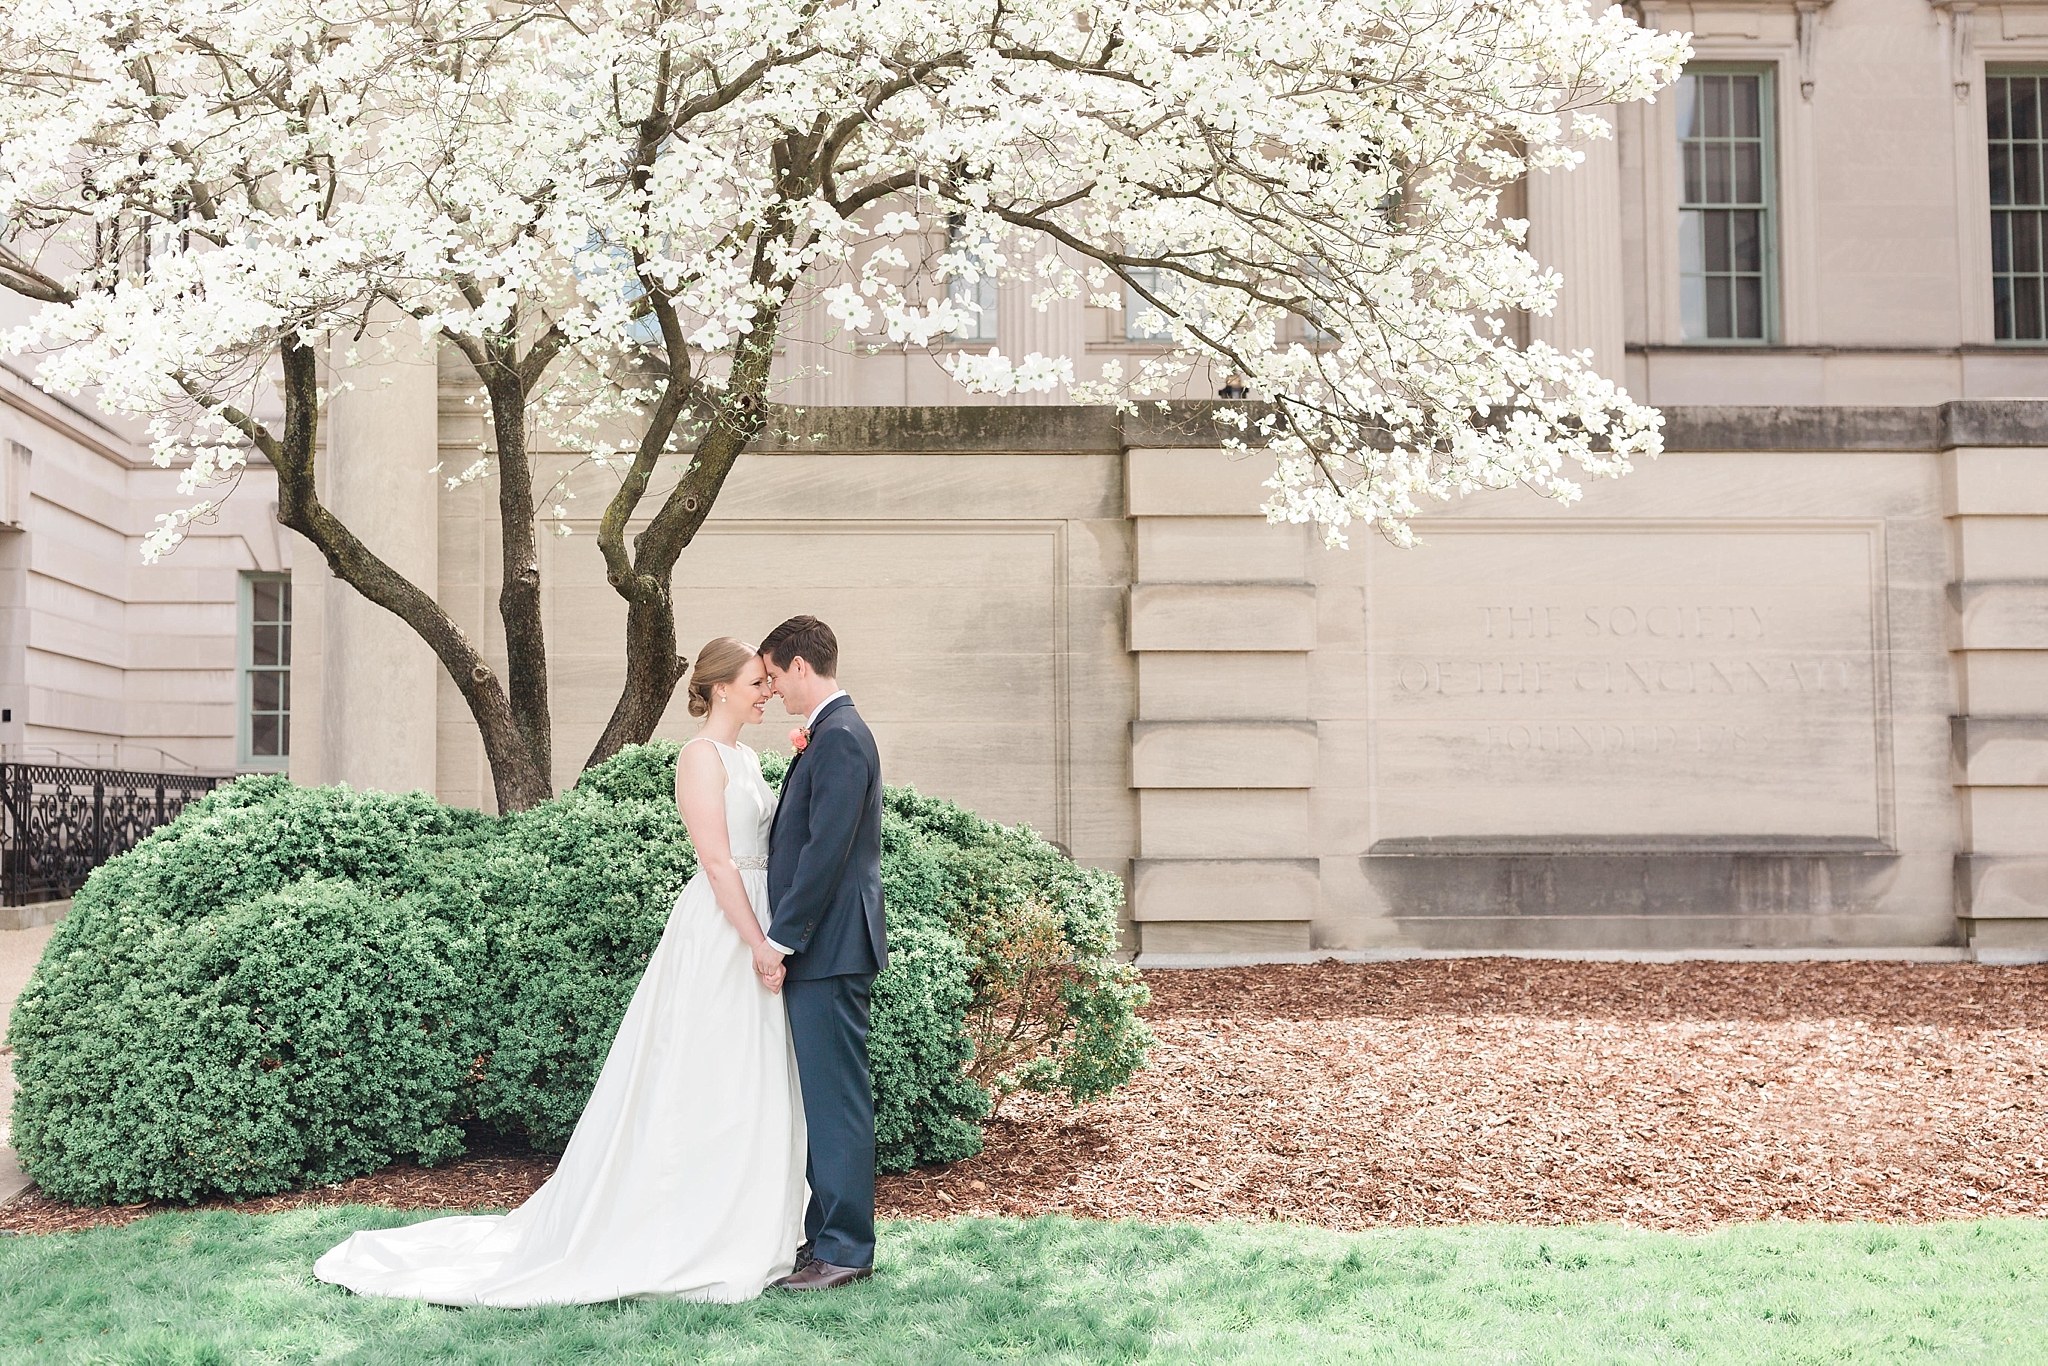 This classic DC wedding is held at the Society of the Cincinnati and Whittemore House in NW Washington, DC with a refreshing spring color palette of blush, peach, and navy blue. 